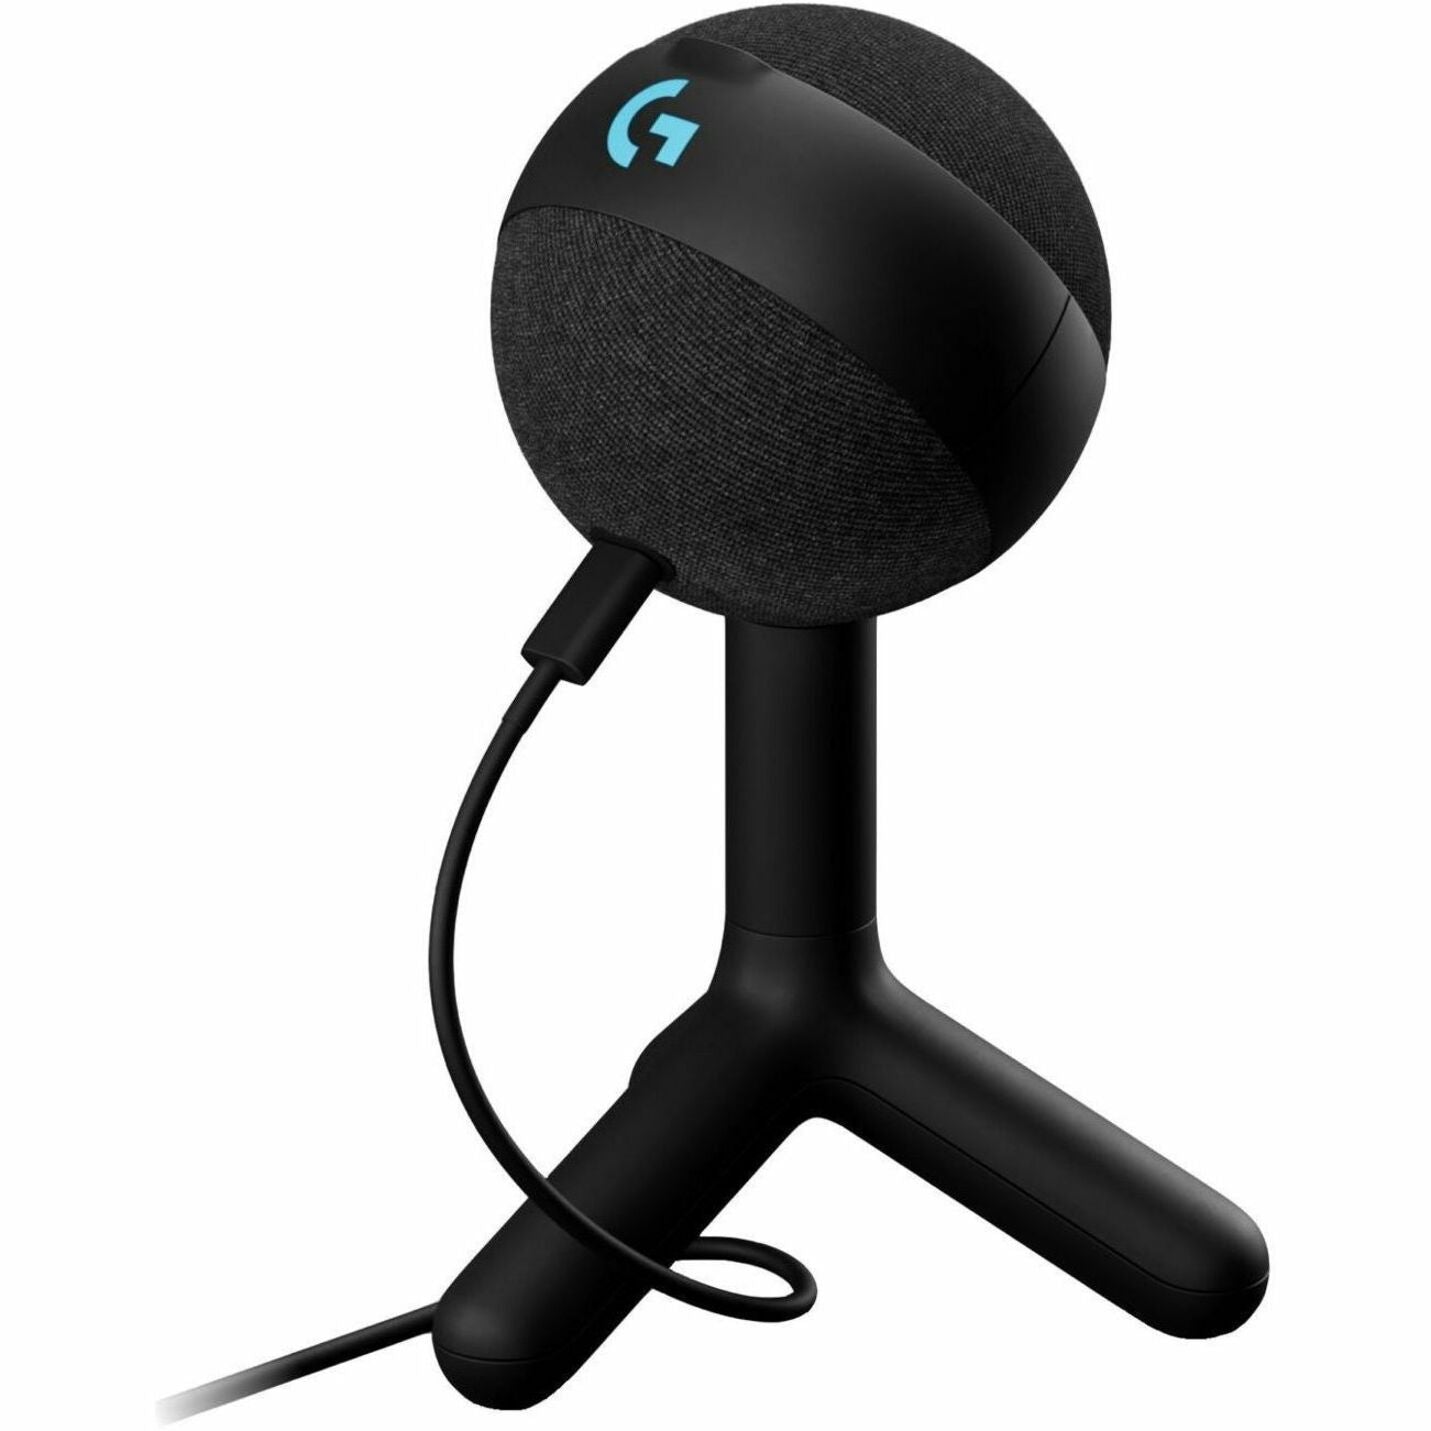 Blue 988-000549 Yeti Orb USB Microphone, Cardioid Condenser Desktop Mic for Live Streaming, Gaming